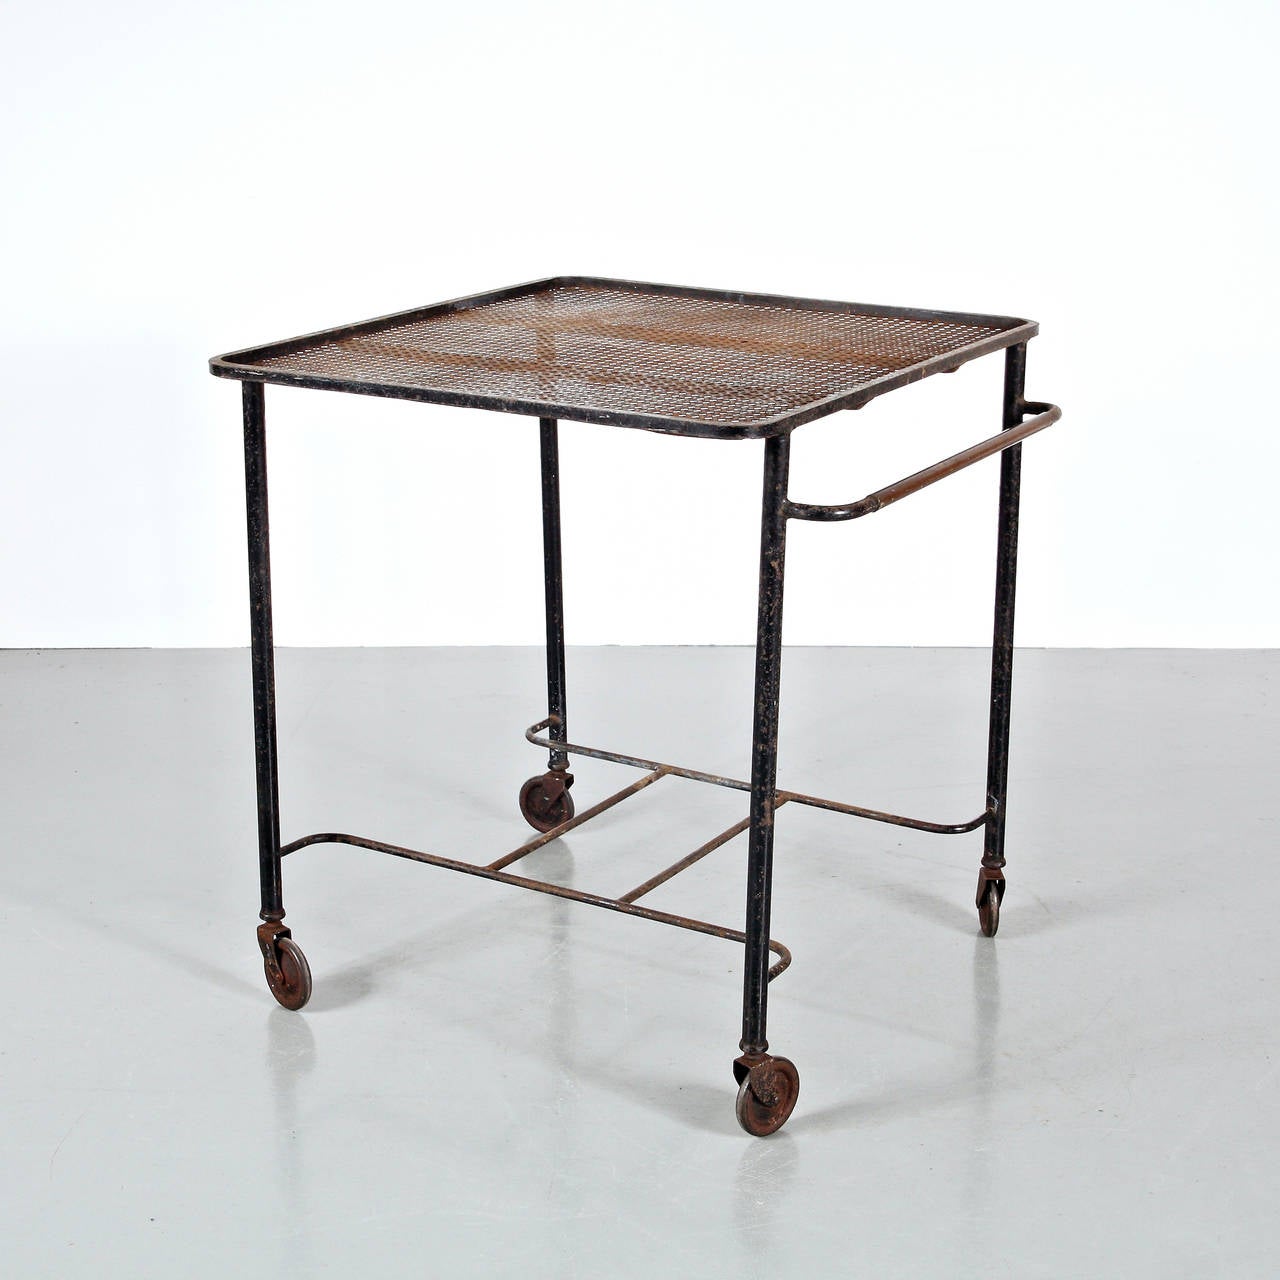 Tea Trolley designed by Mathieu Matégot.
Manufactured by Ateliers Matégot (France) circa 1950.
Folded, perforated metal lacquered in black and brass detail.

In good original condition, with minor wear consistent with age and use, preserving a